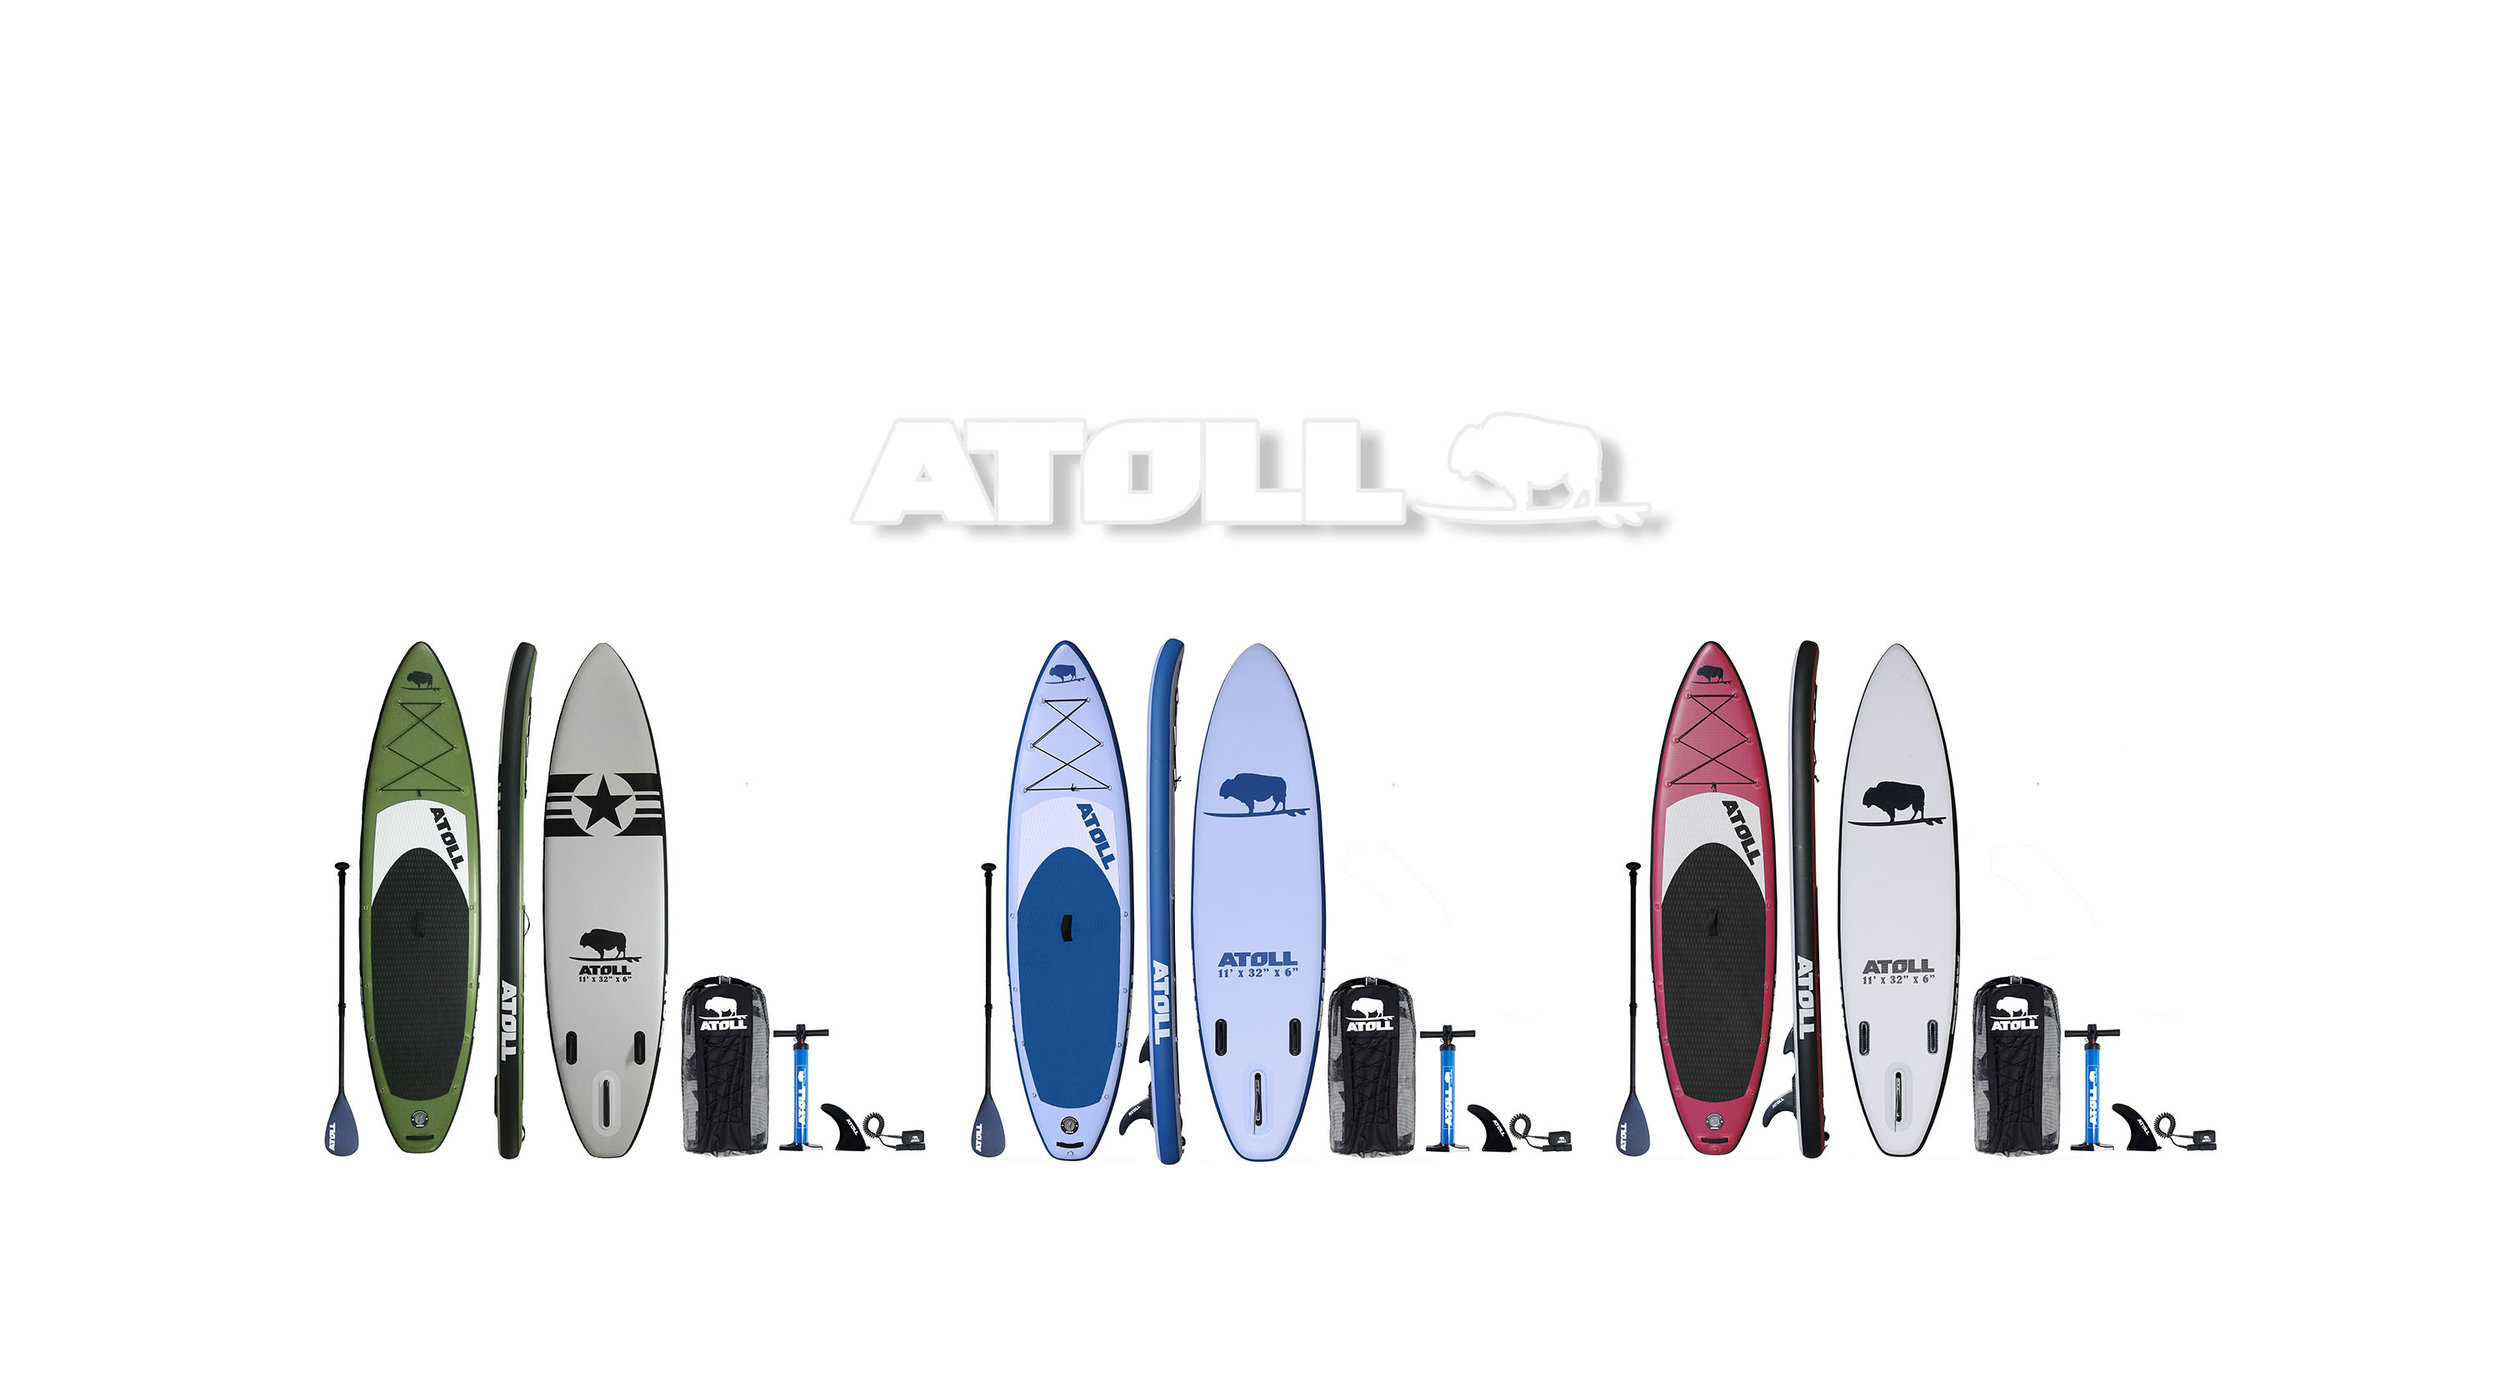 All Colors of Atoll inflatable paddle boards